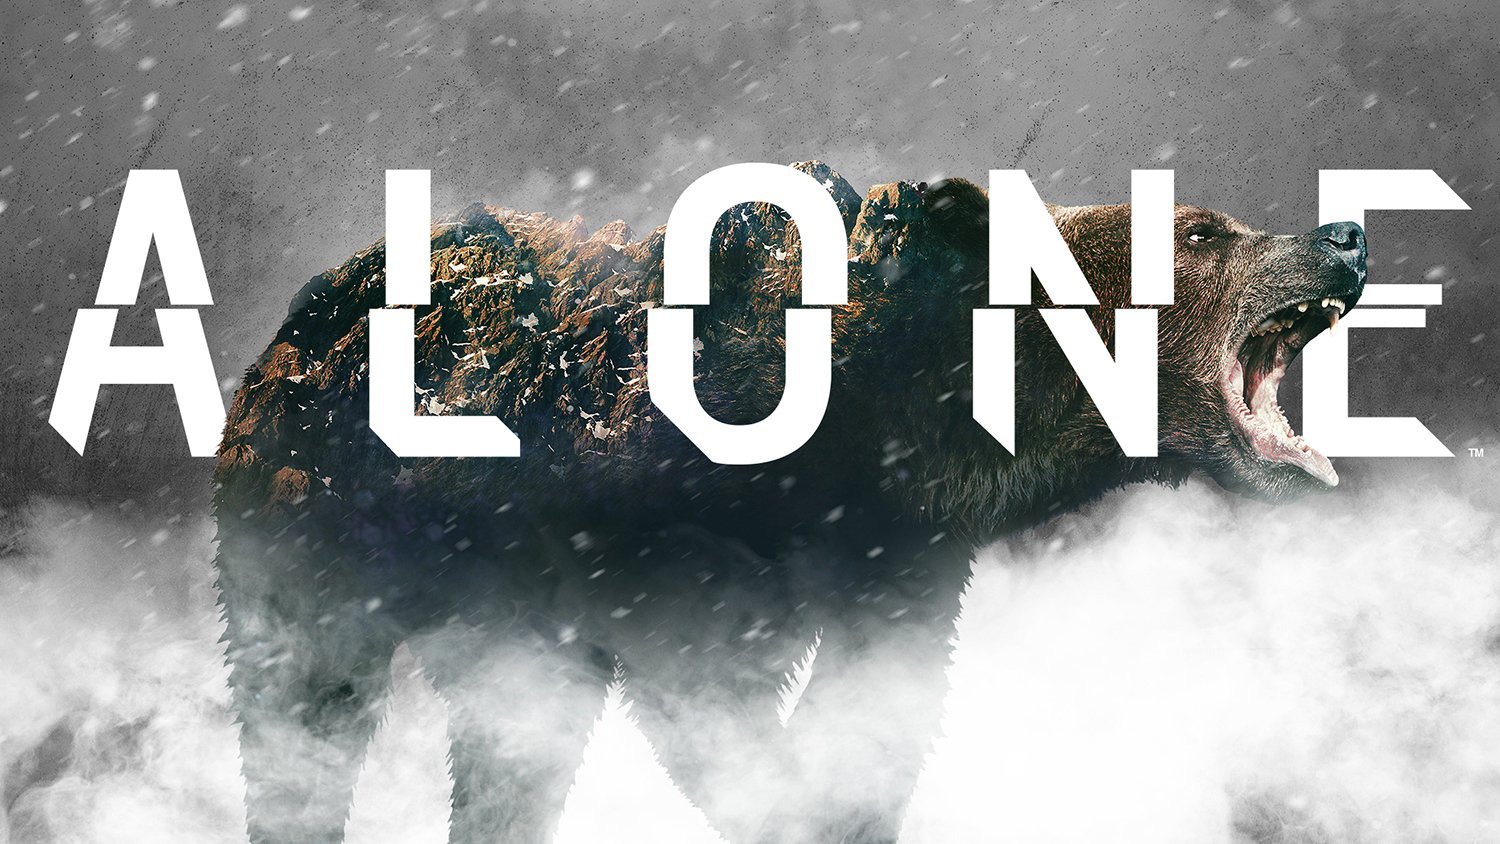 The logo for History Channel's Alone, which has an extensive list of banned items